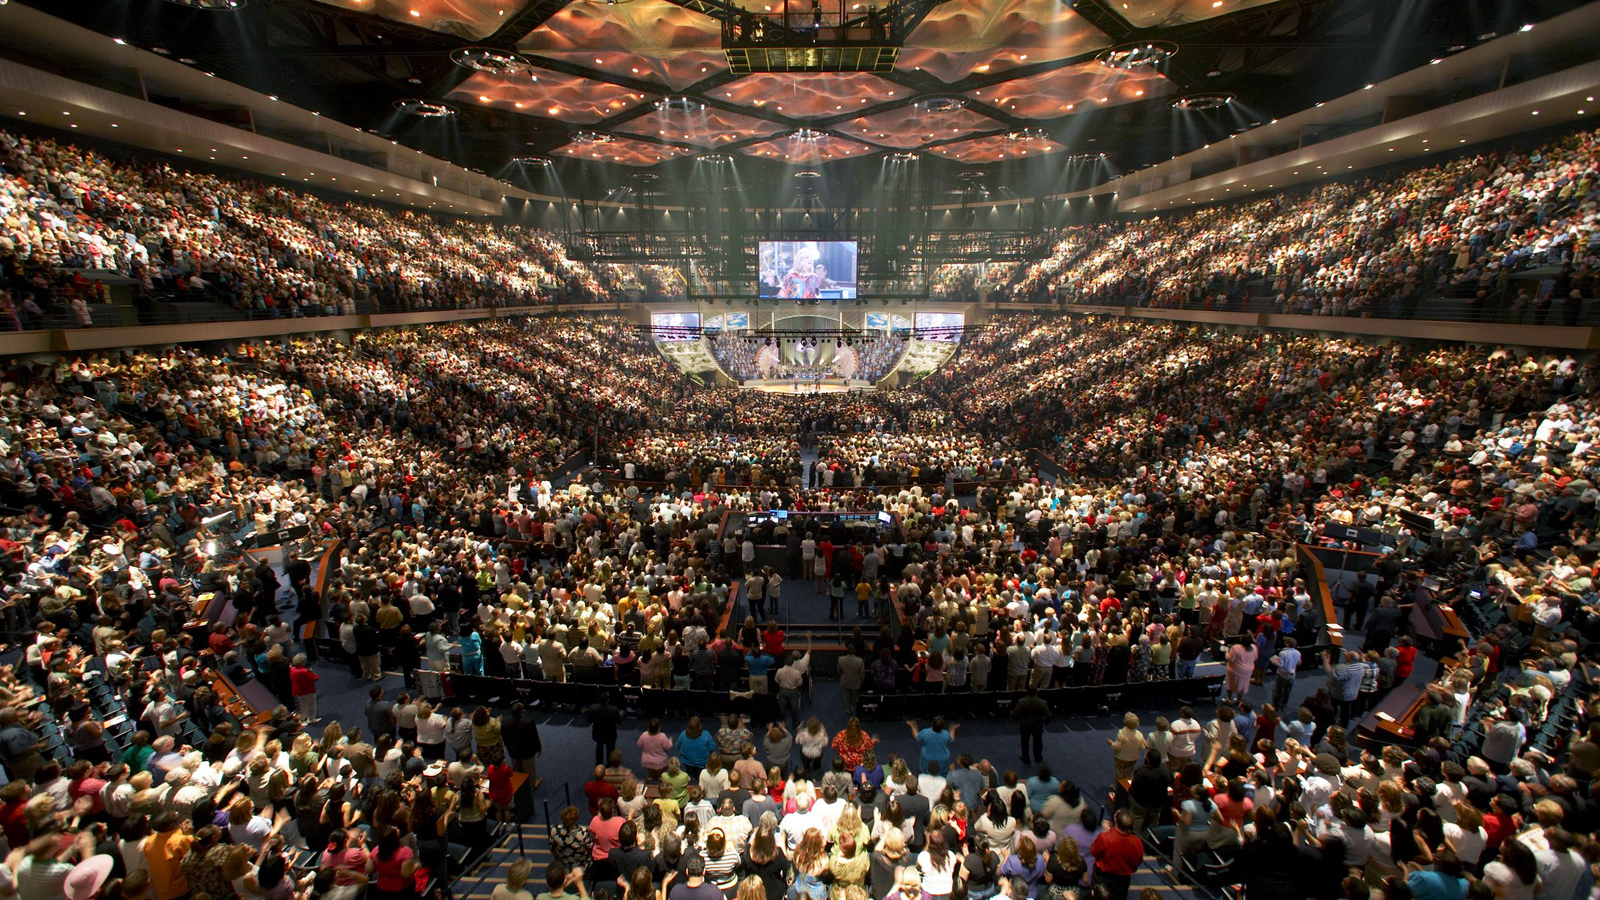 Lakewood Church is a nondenominational Christian megachurch in Houston. It is one of the largest congregations in the U.S., occupying a former sports arena. Photo courtesy of Creative Commons